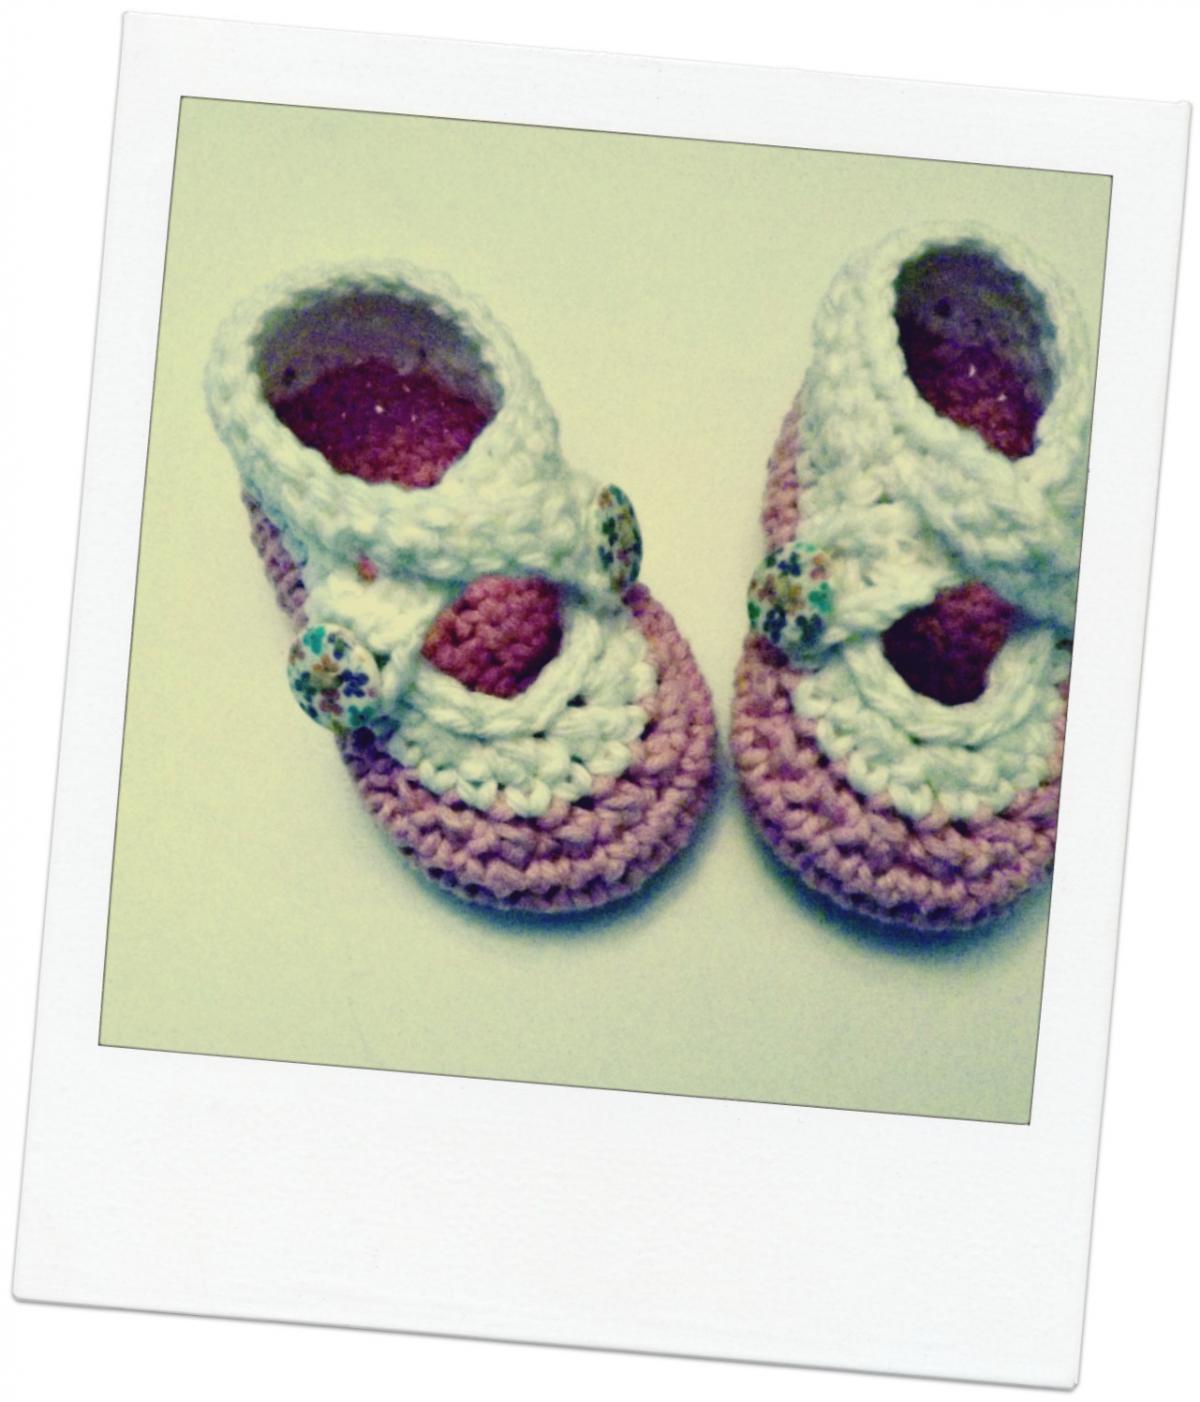 Crochet Two Strap Baby Booties, Antique Ivory And Pink Cotton